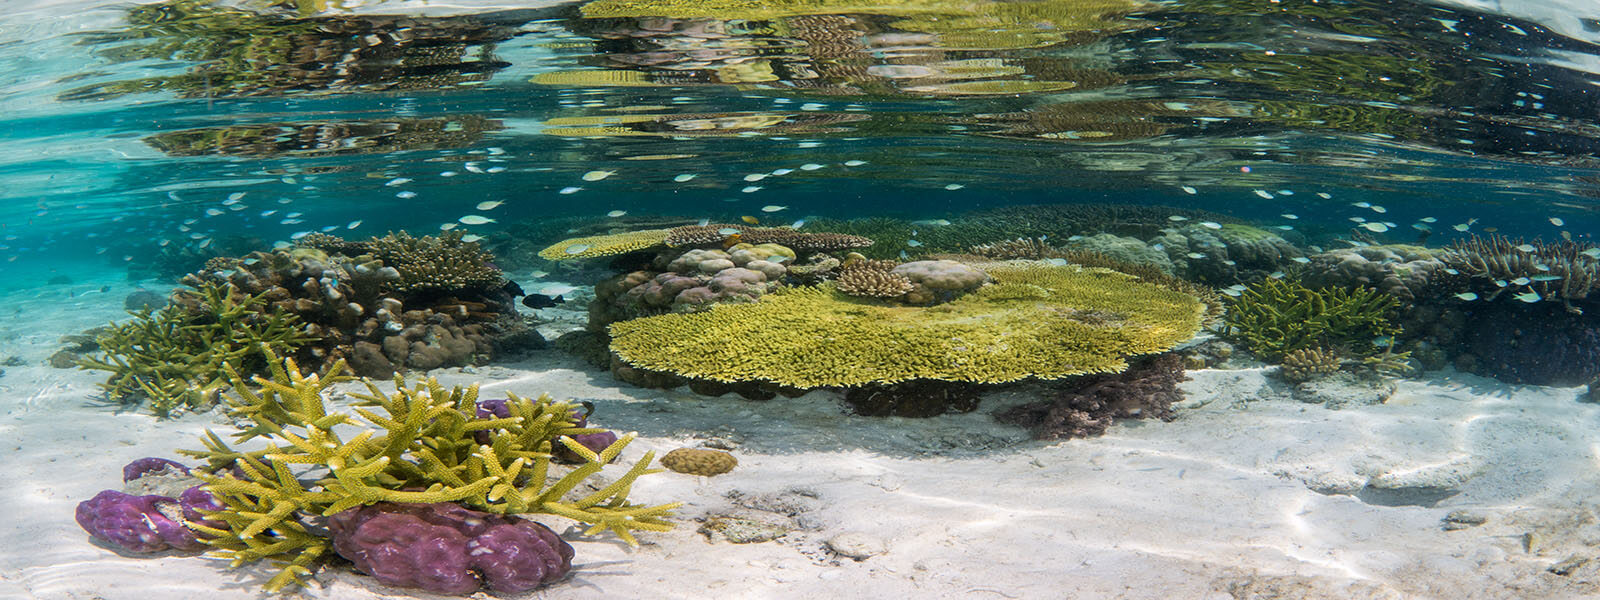 Shallow coral gardens, like this one in Misool, Raja Ampat, can be found throughout the coral triangle